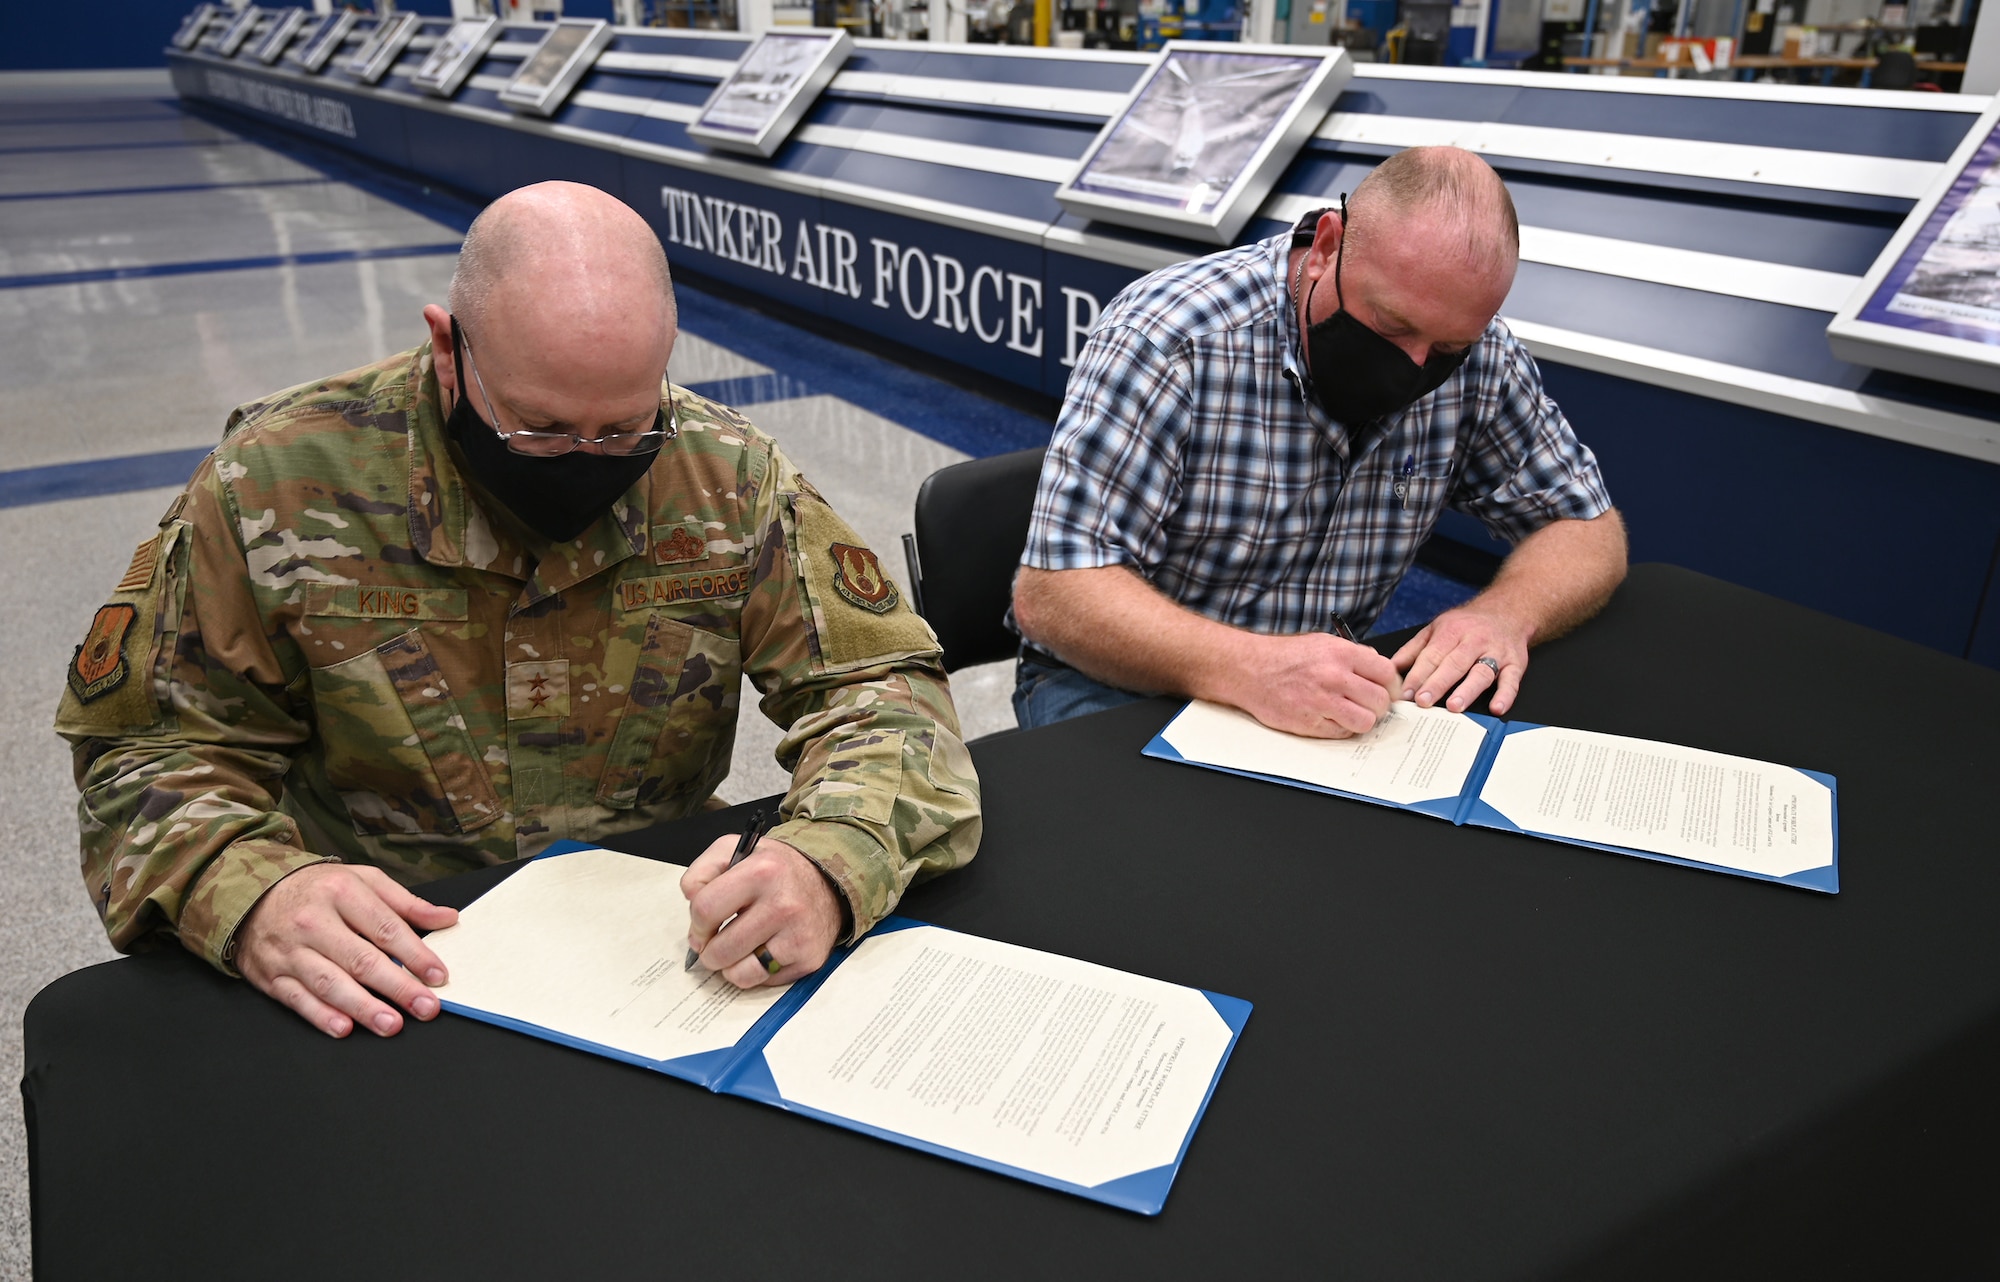 Two men at a table signing documents